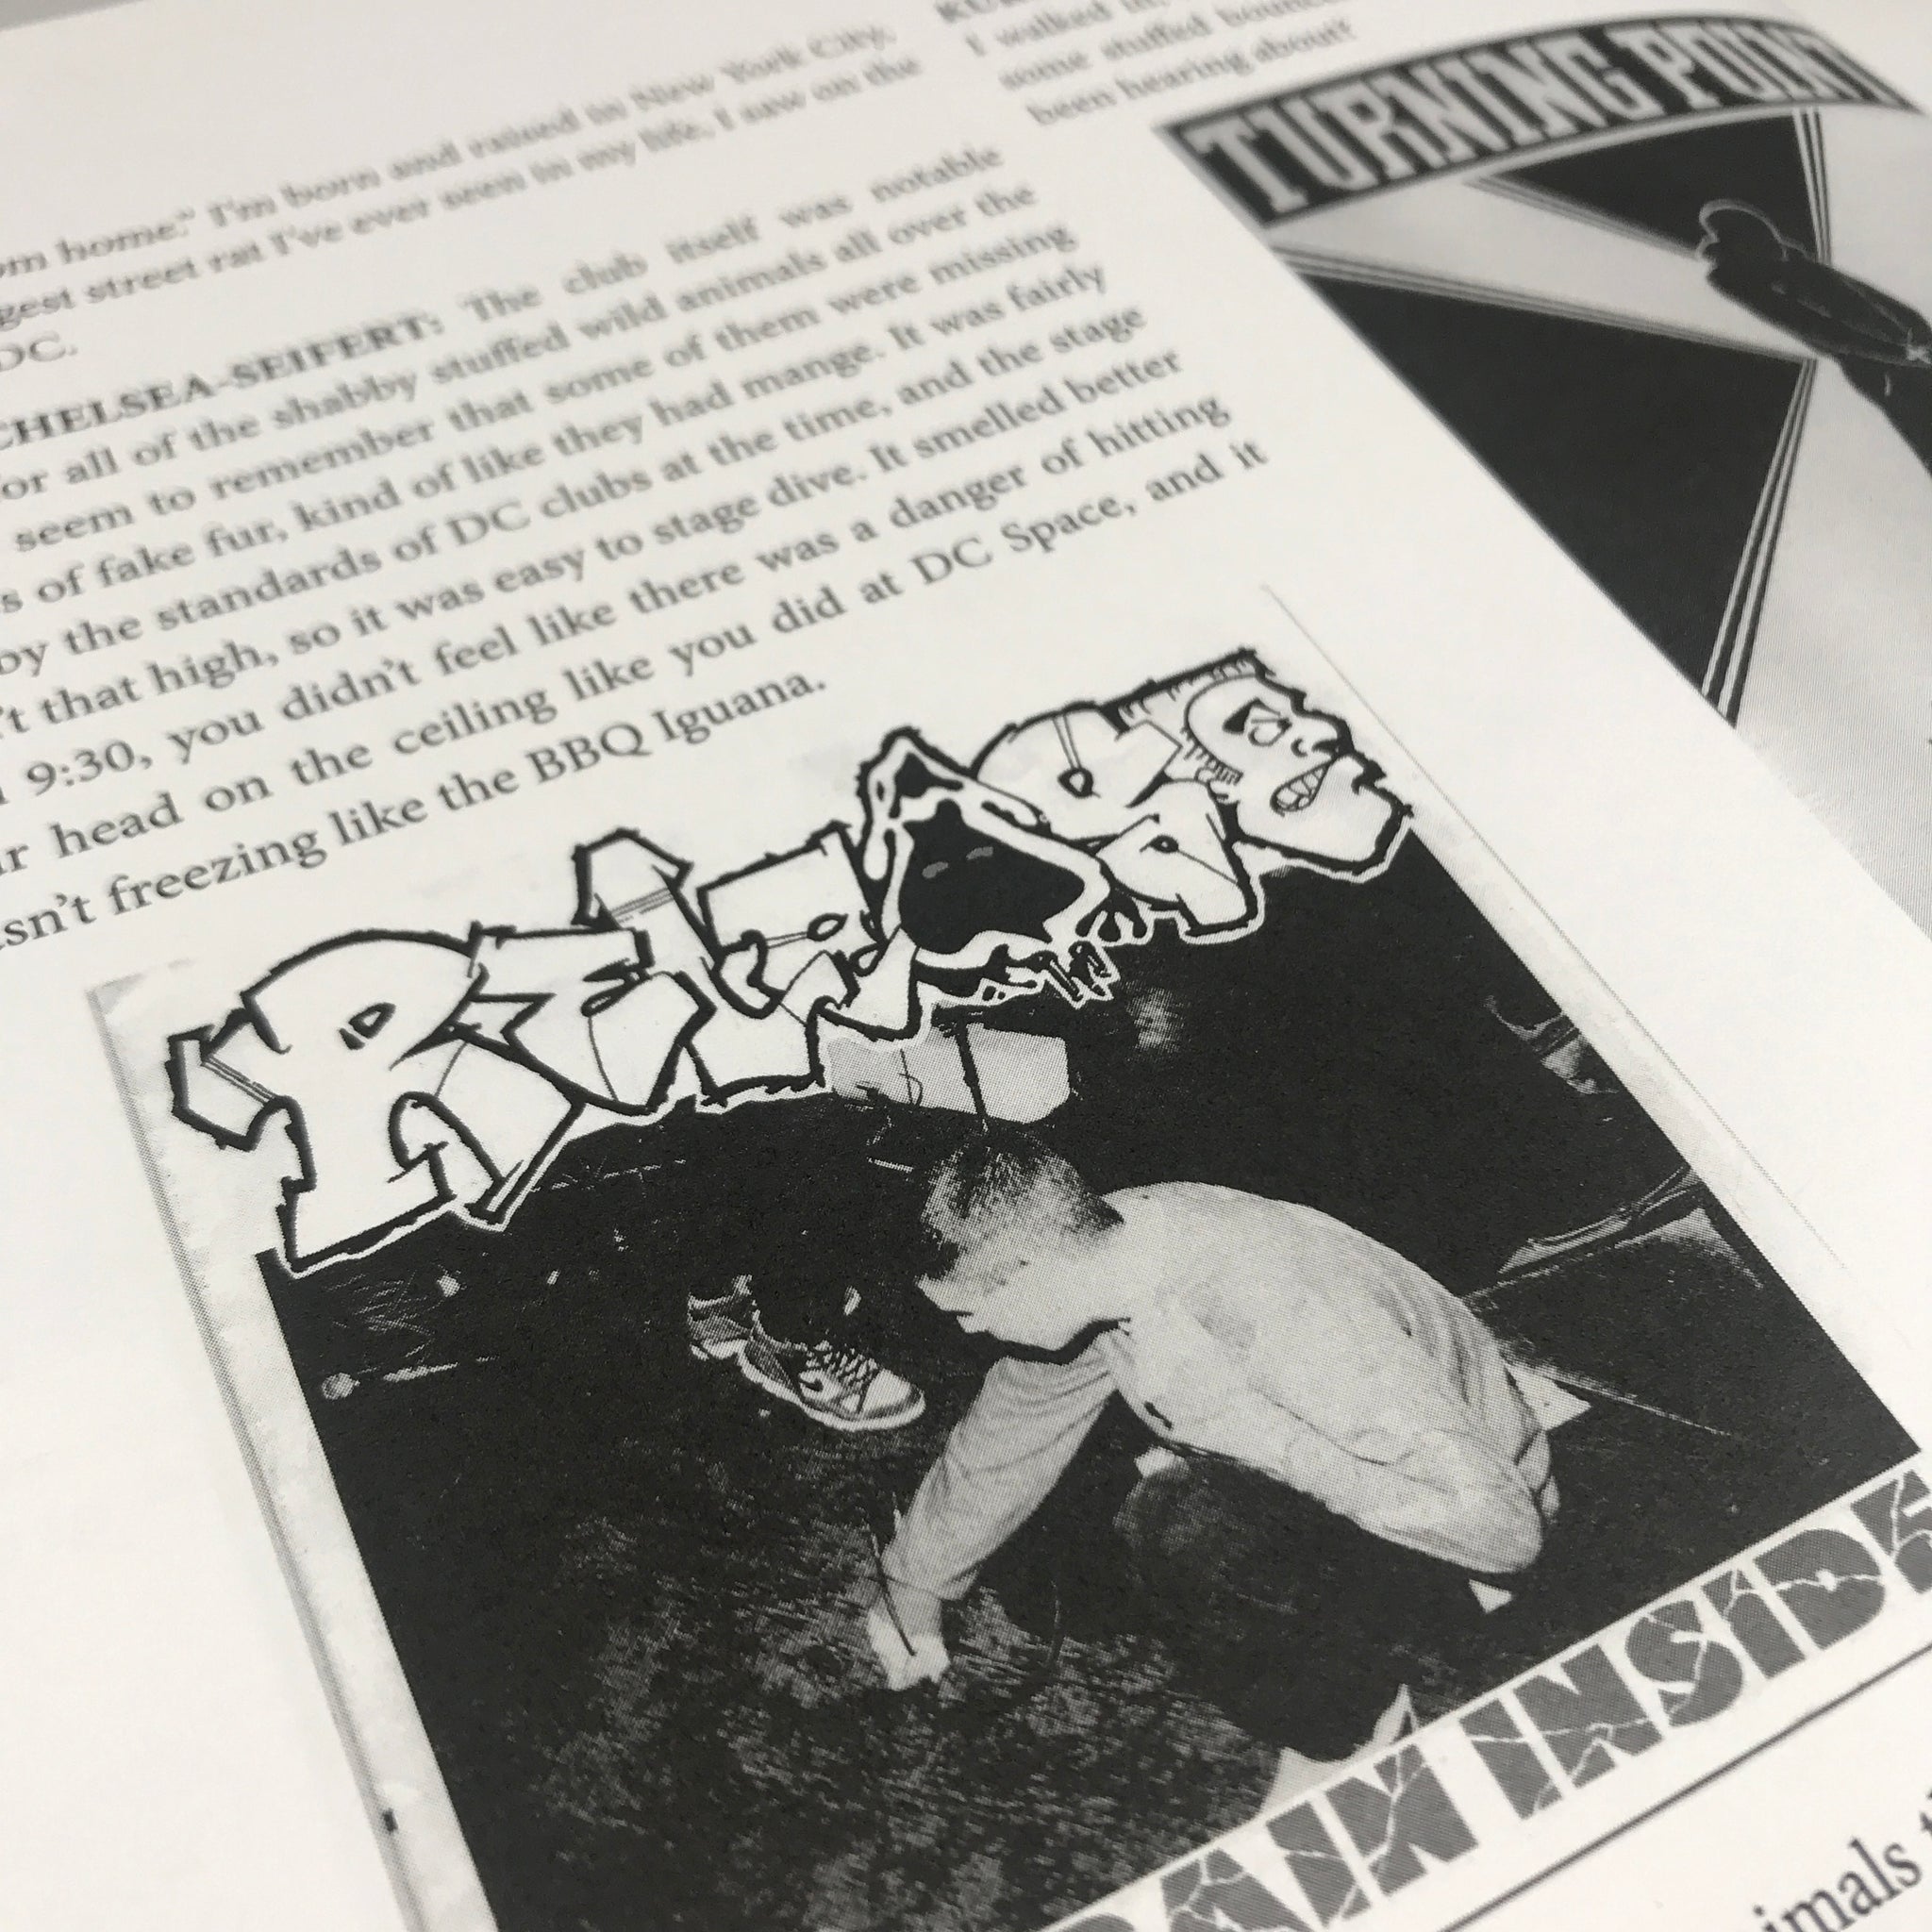 Live at the Safari Club: A History of harDCcore Punk in the Nation's Capital, 1988-1998